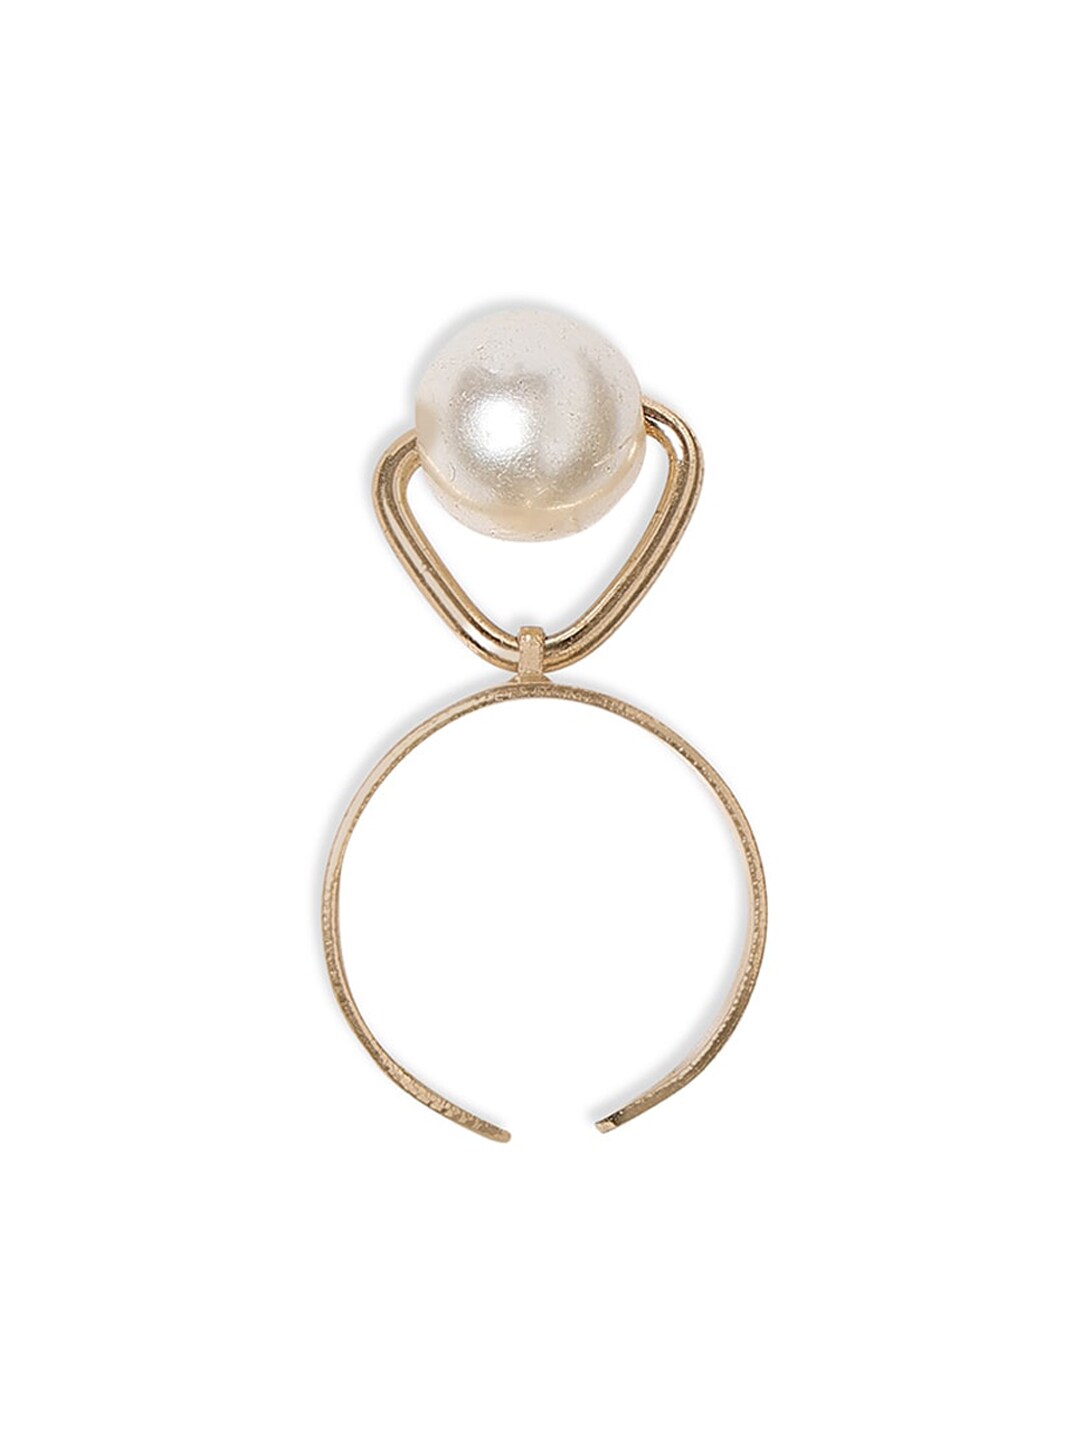 Blisscovered Gold-Toned Pearl Adjustable Ring Price in India